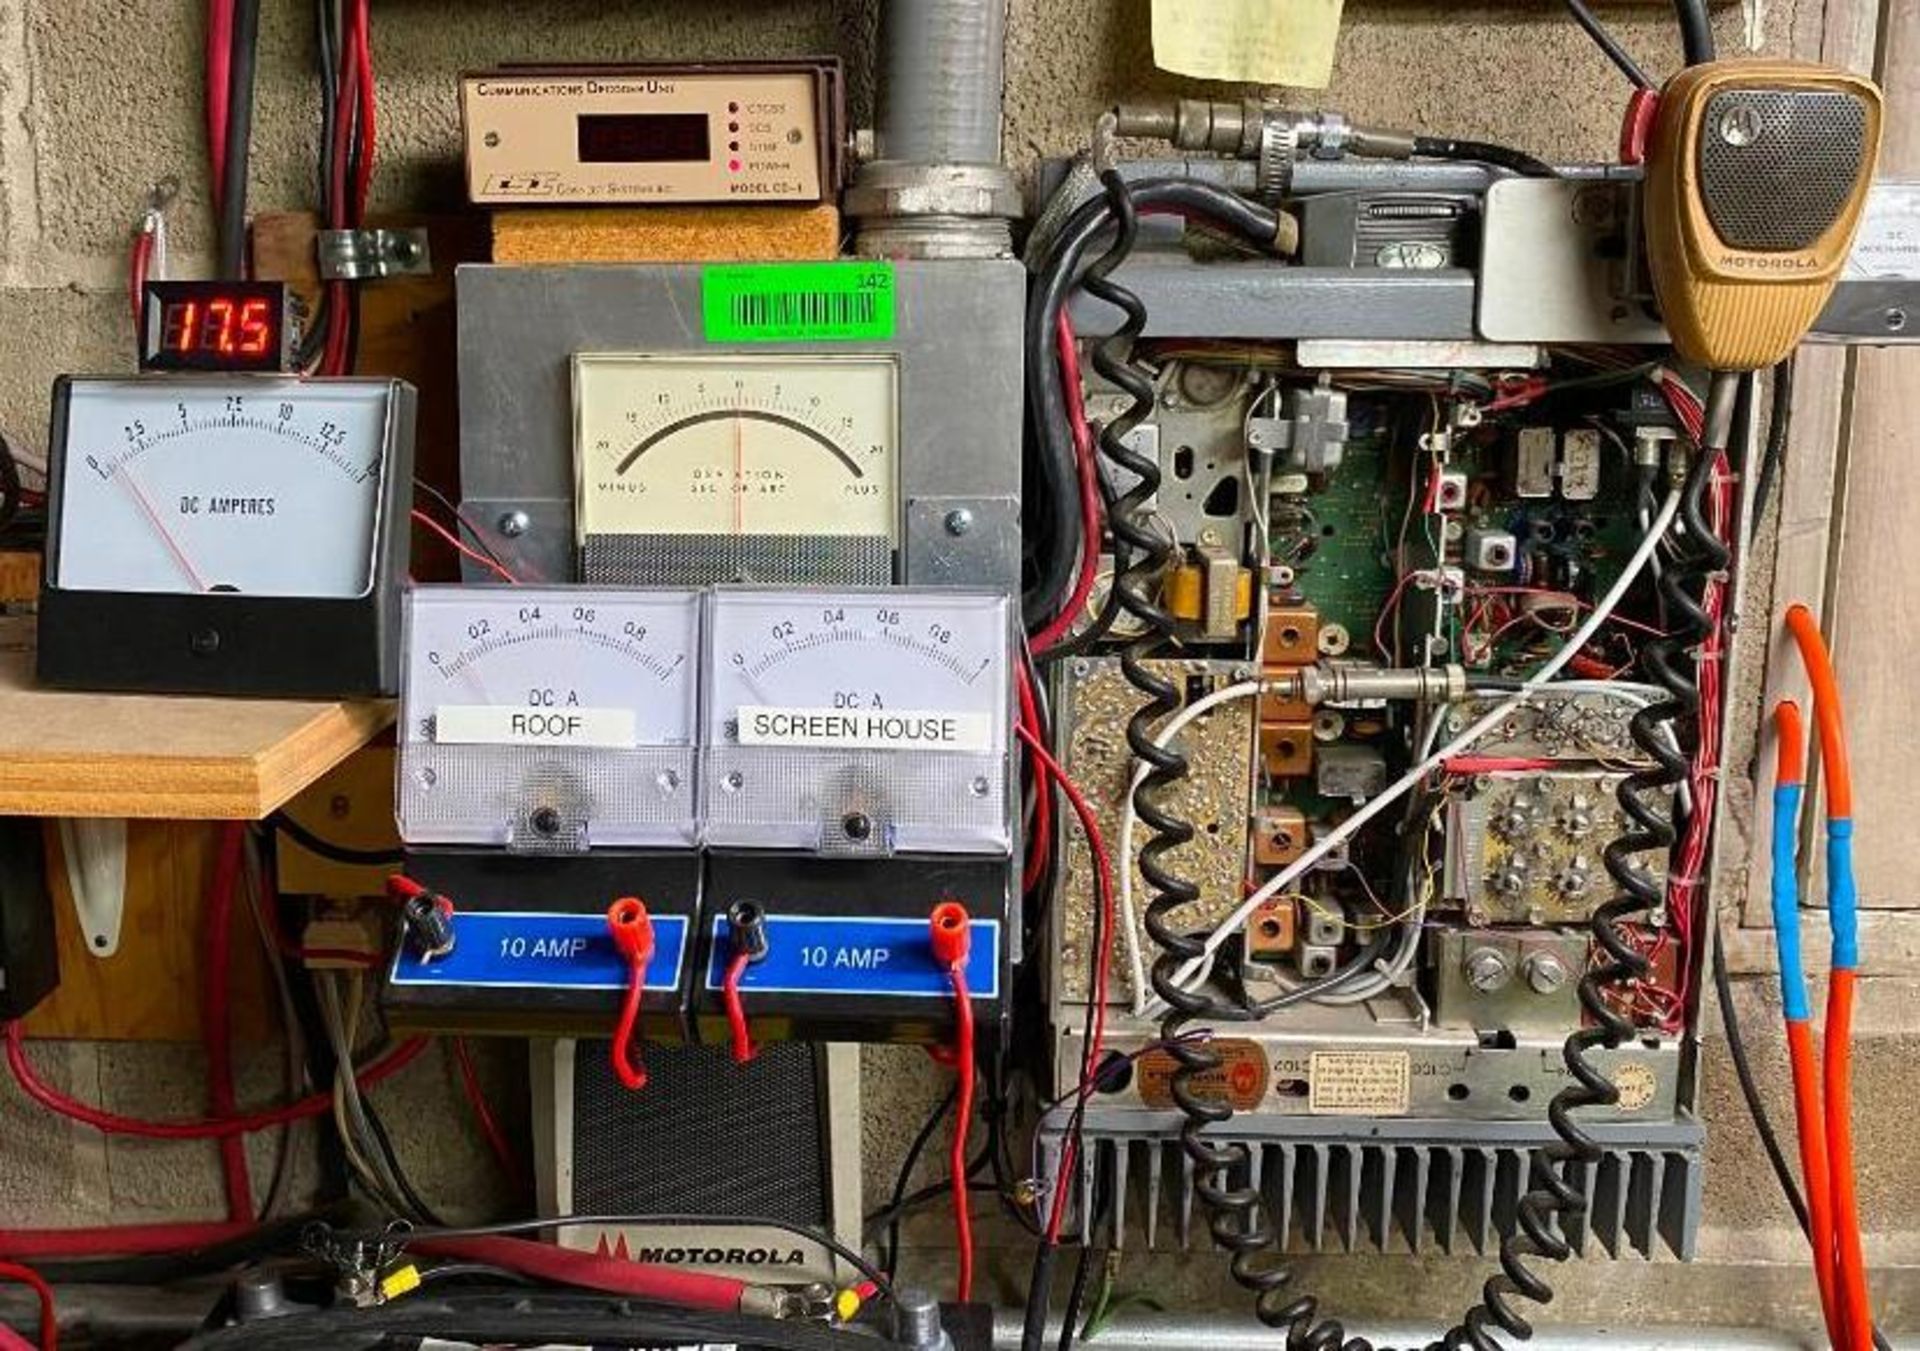 DESCRIPTION ANTENNA CONTROL UNIT WITH AMPERE METER, DECODER UNIT, AND OTHER METERS AS SHOWN LOCATION